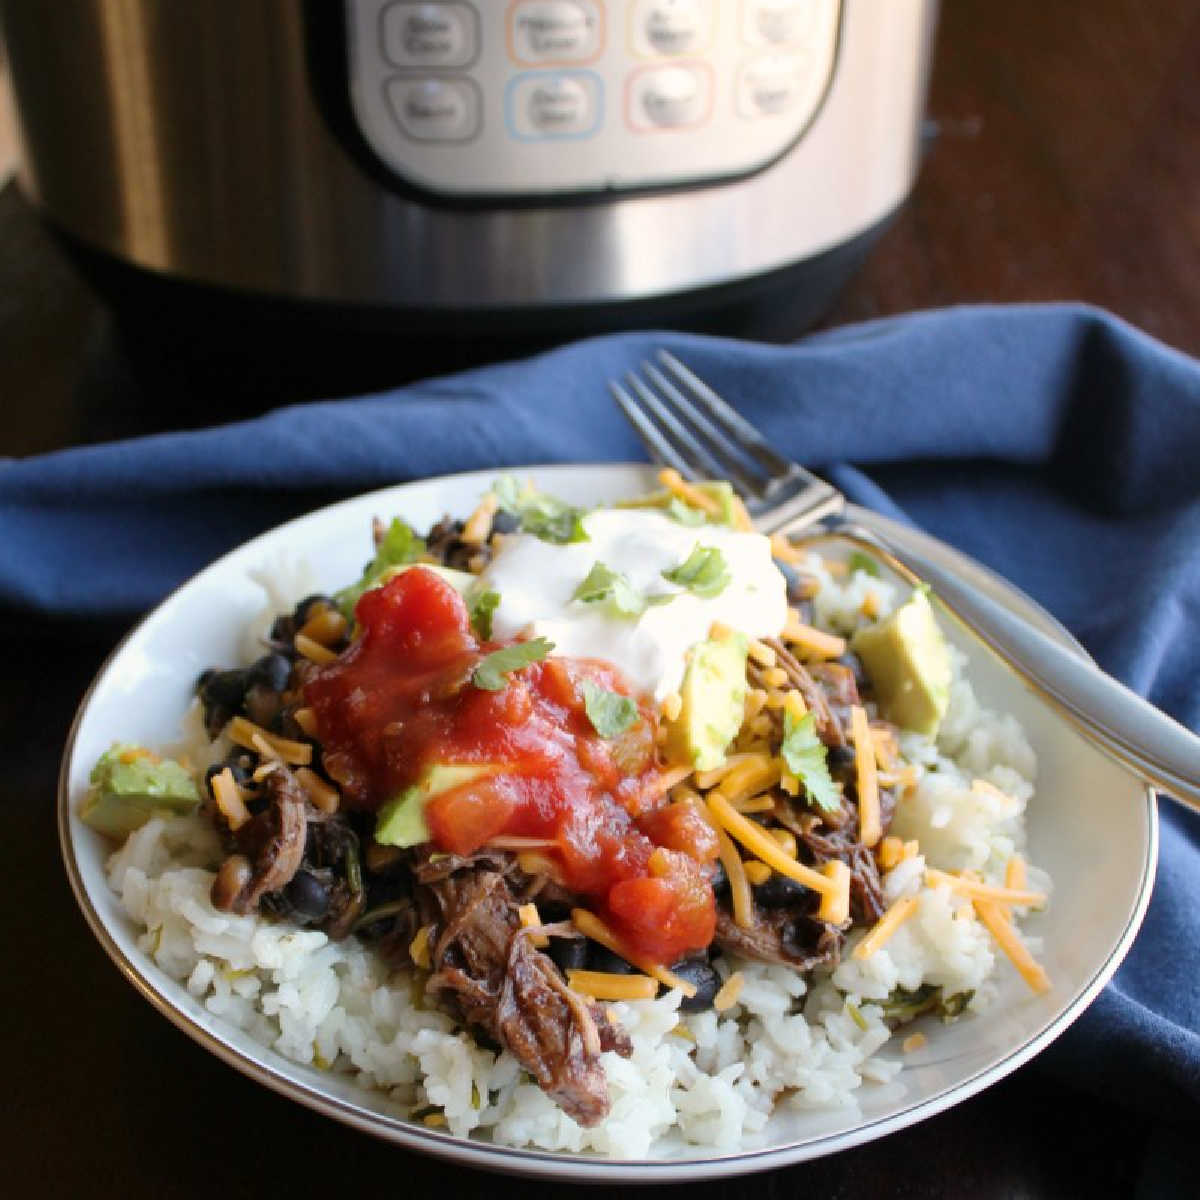 Burrito bowl made with cilantro lime rice, salsa chicken, salsa, sour cream, and shredded cheese in front of an instant pot.